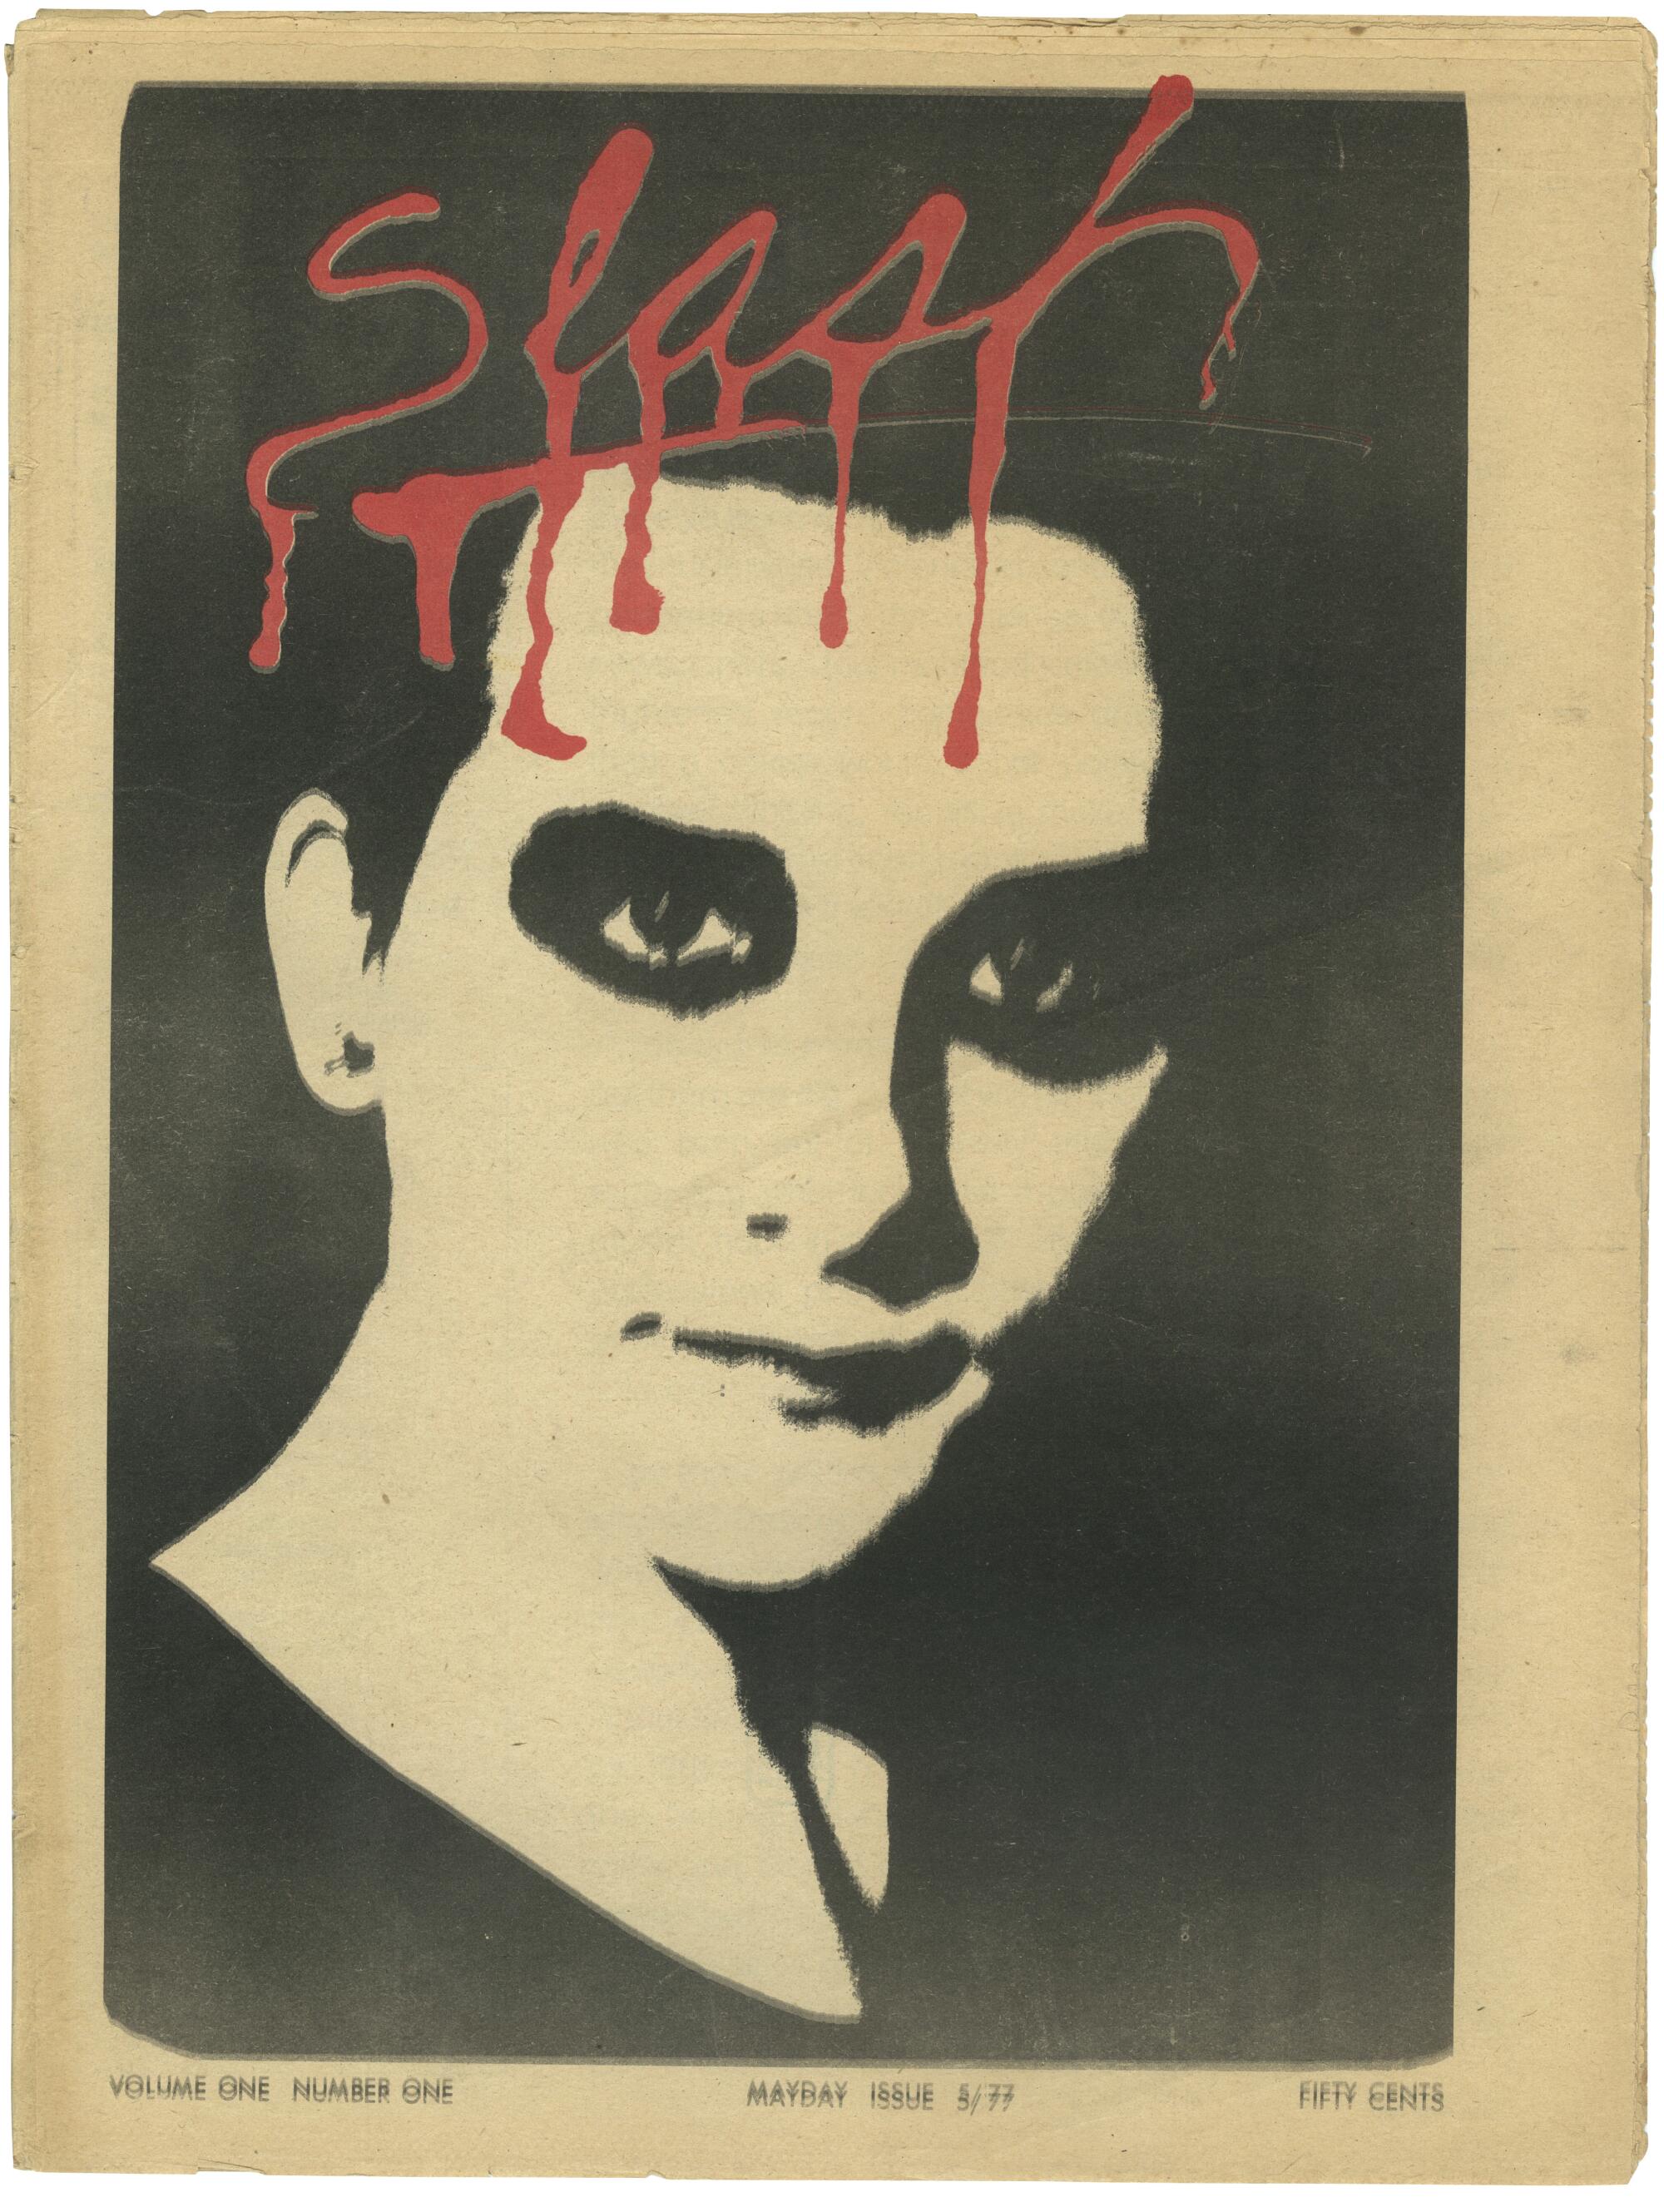 Melanie Nissen's photo of Dave Vanian of the Damned adorns the cover of Slash magazine, 1977.